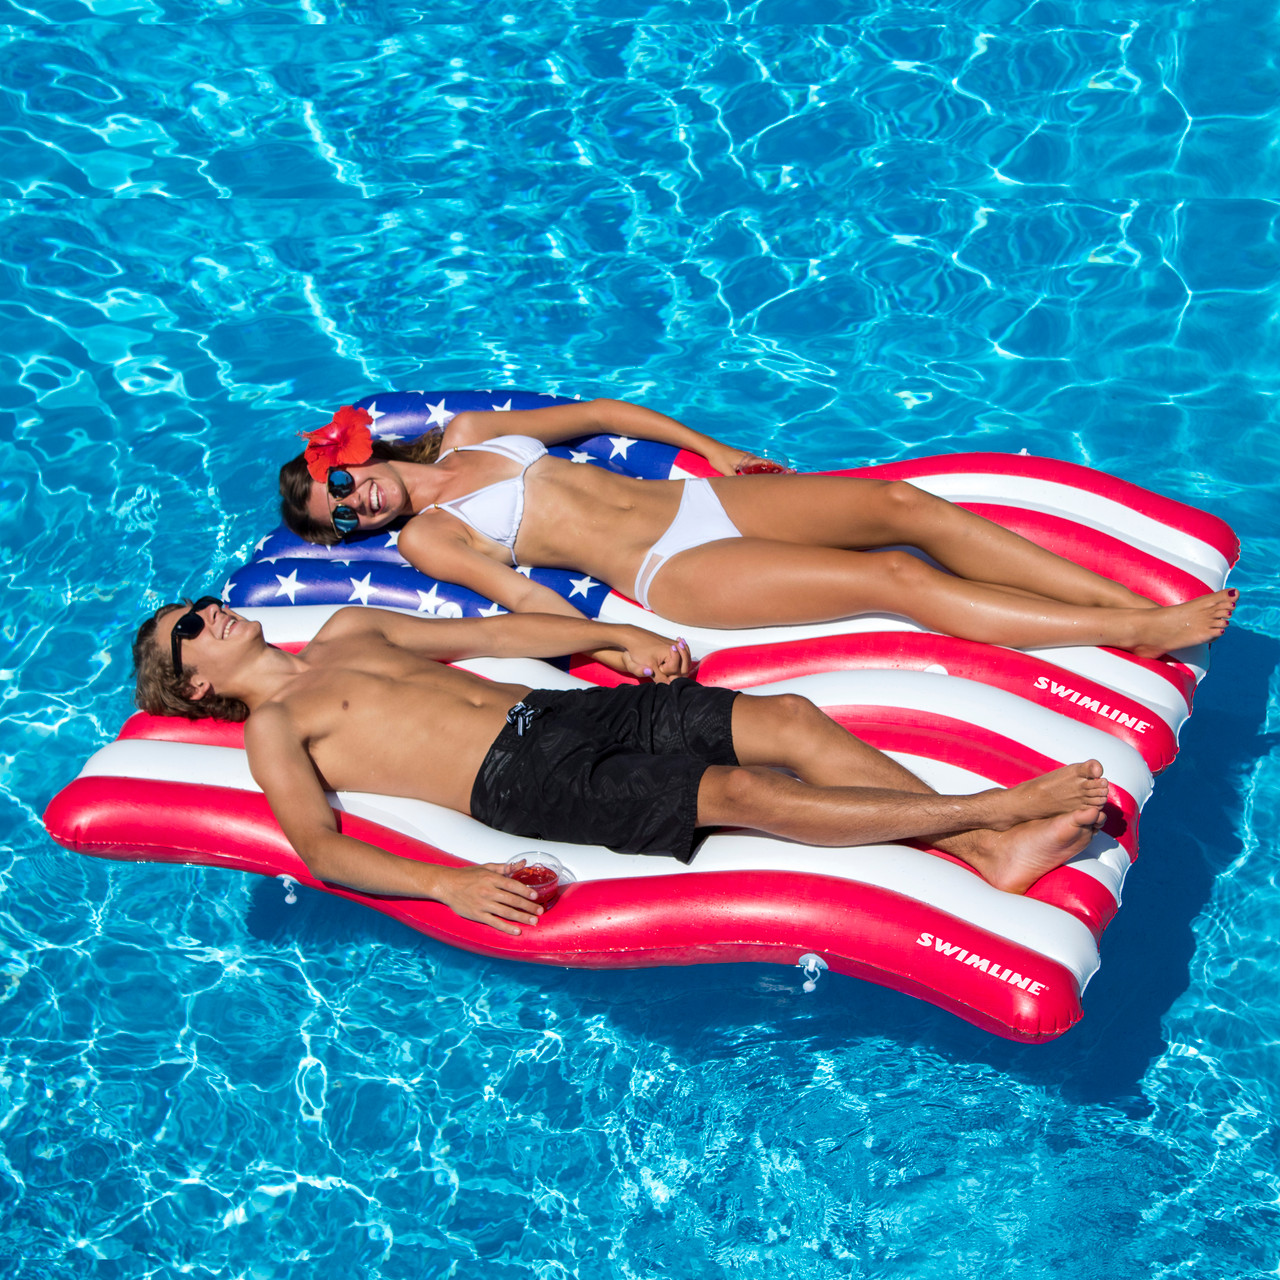 Show Your Patriotic Pride with a Set of 2 American Flag Pool Floats